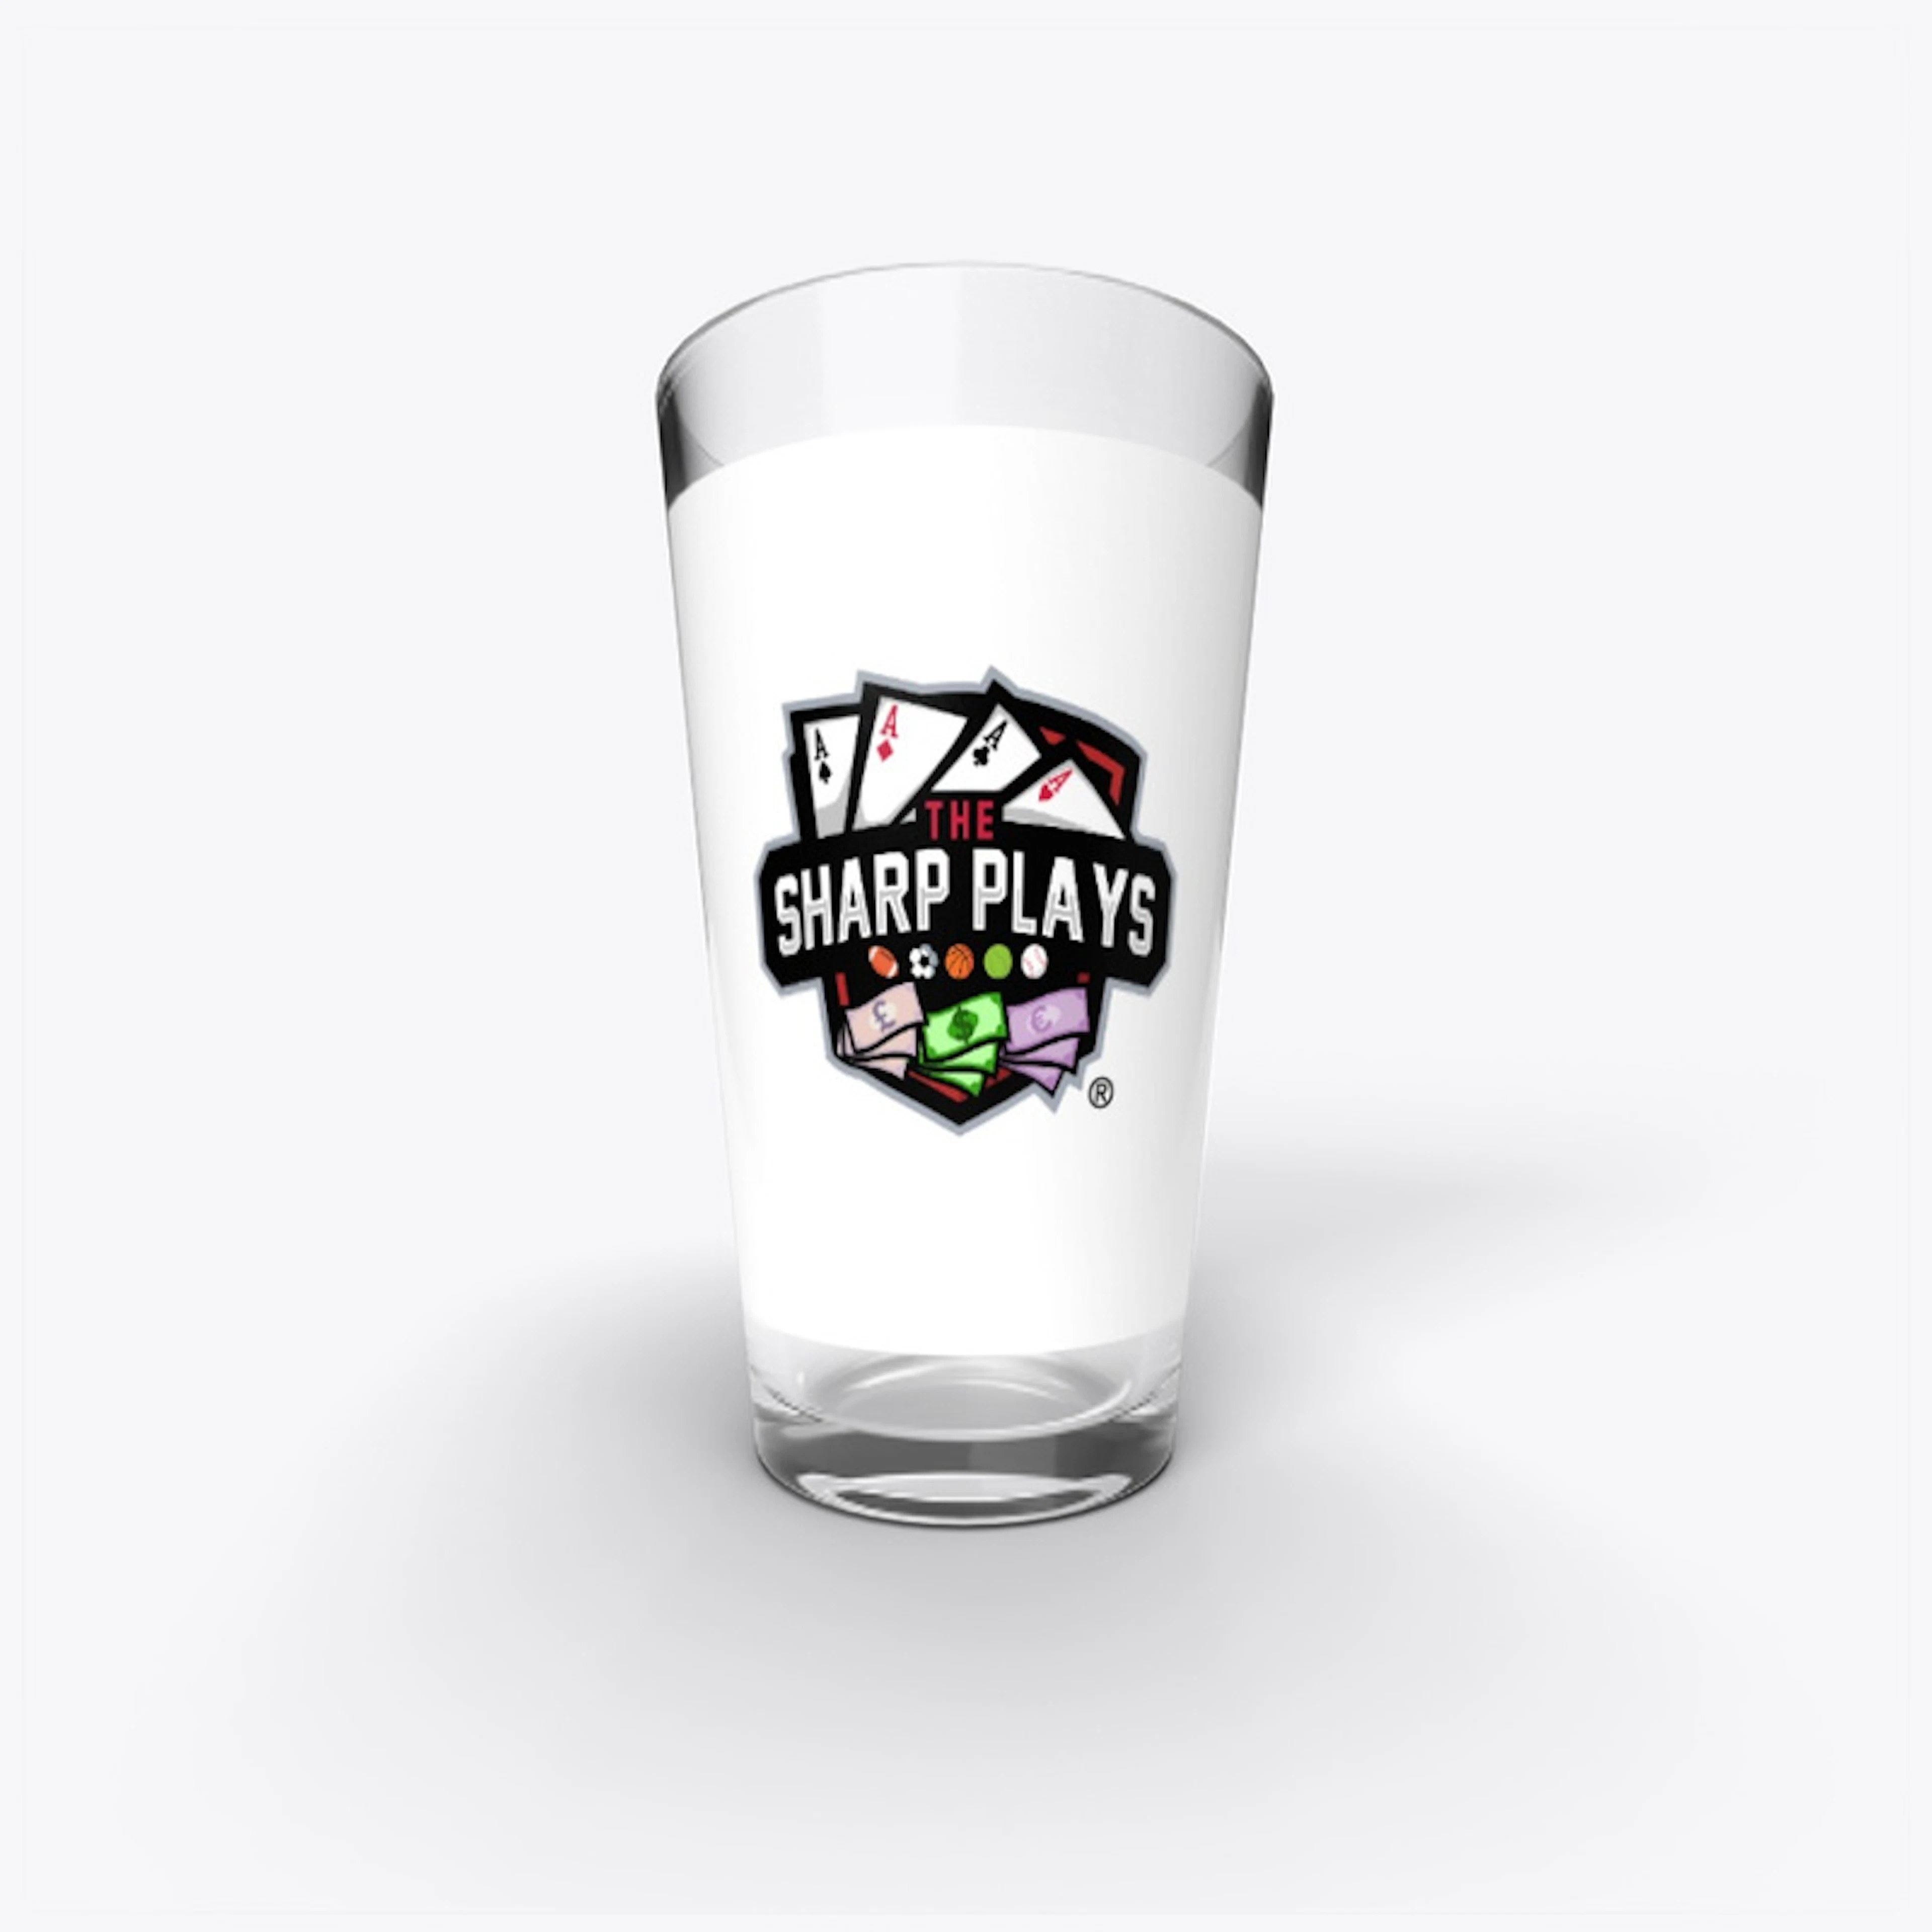 Cheers to The Sharp Plays - Pint Glass